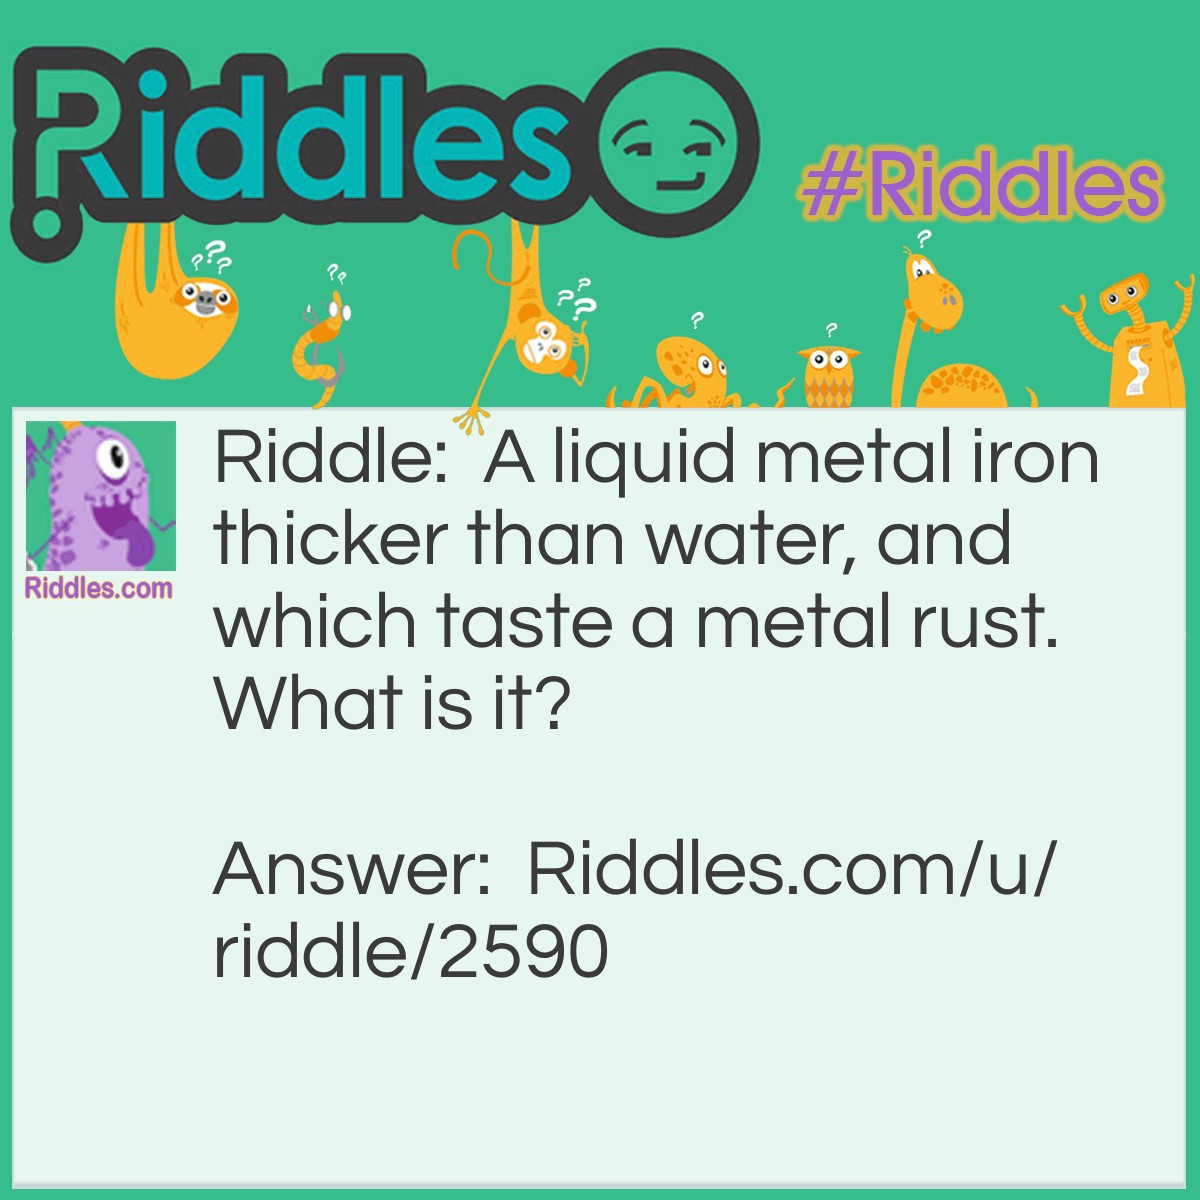 Riddle: A liquid metal iron thicker than water, and which taste a metal rust. What is it? Answer: Blood.